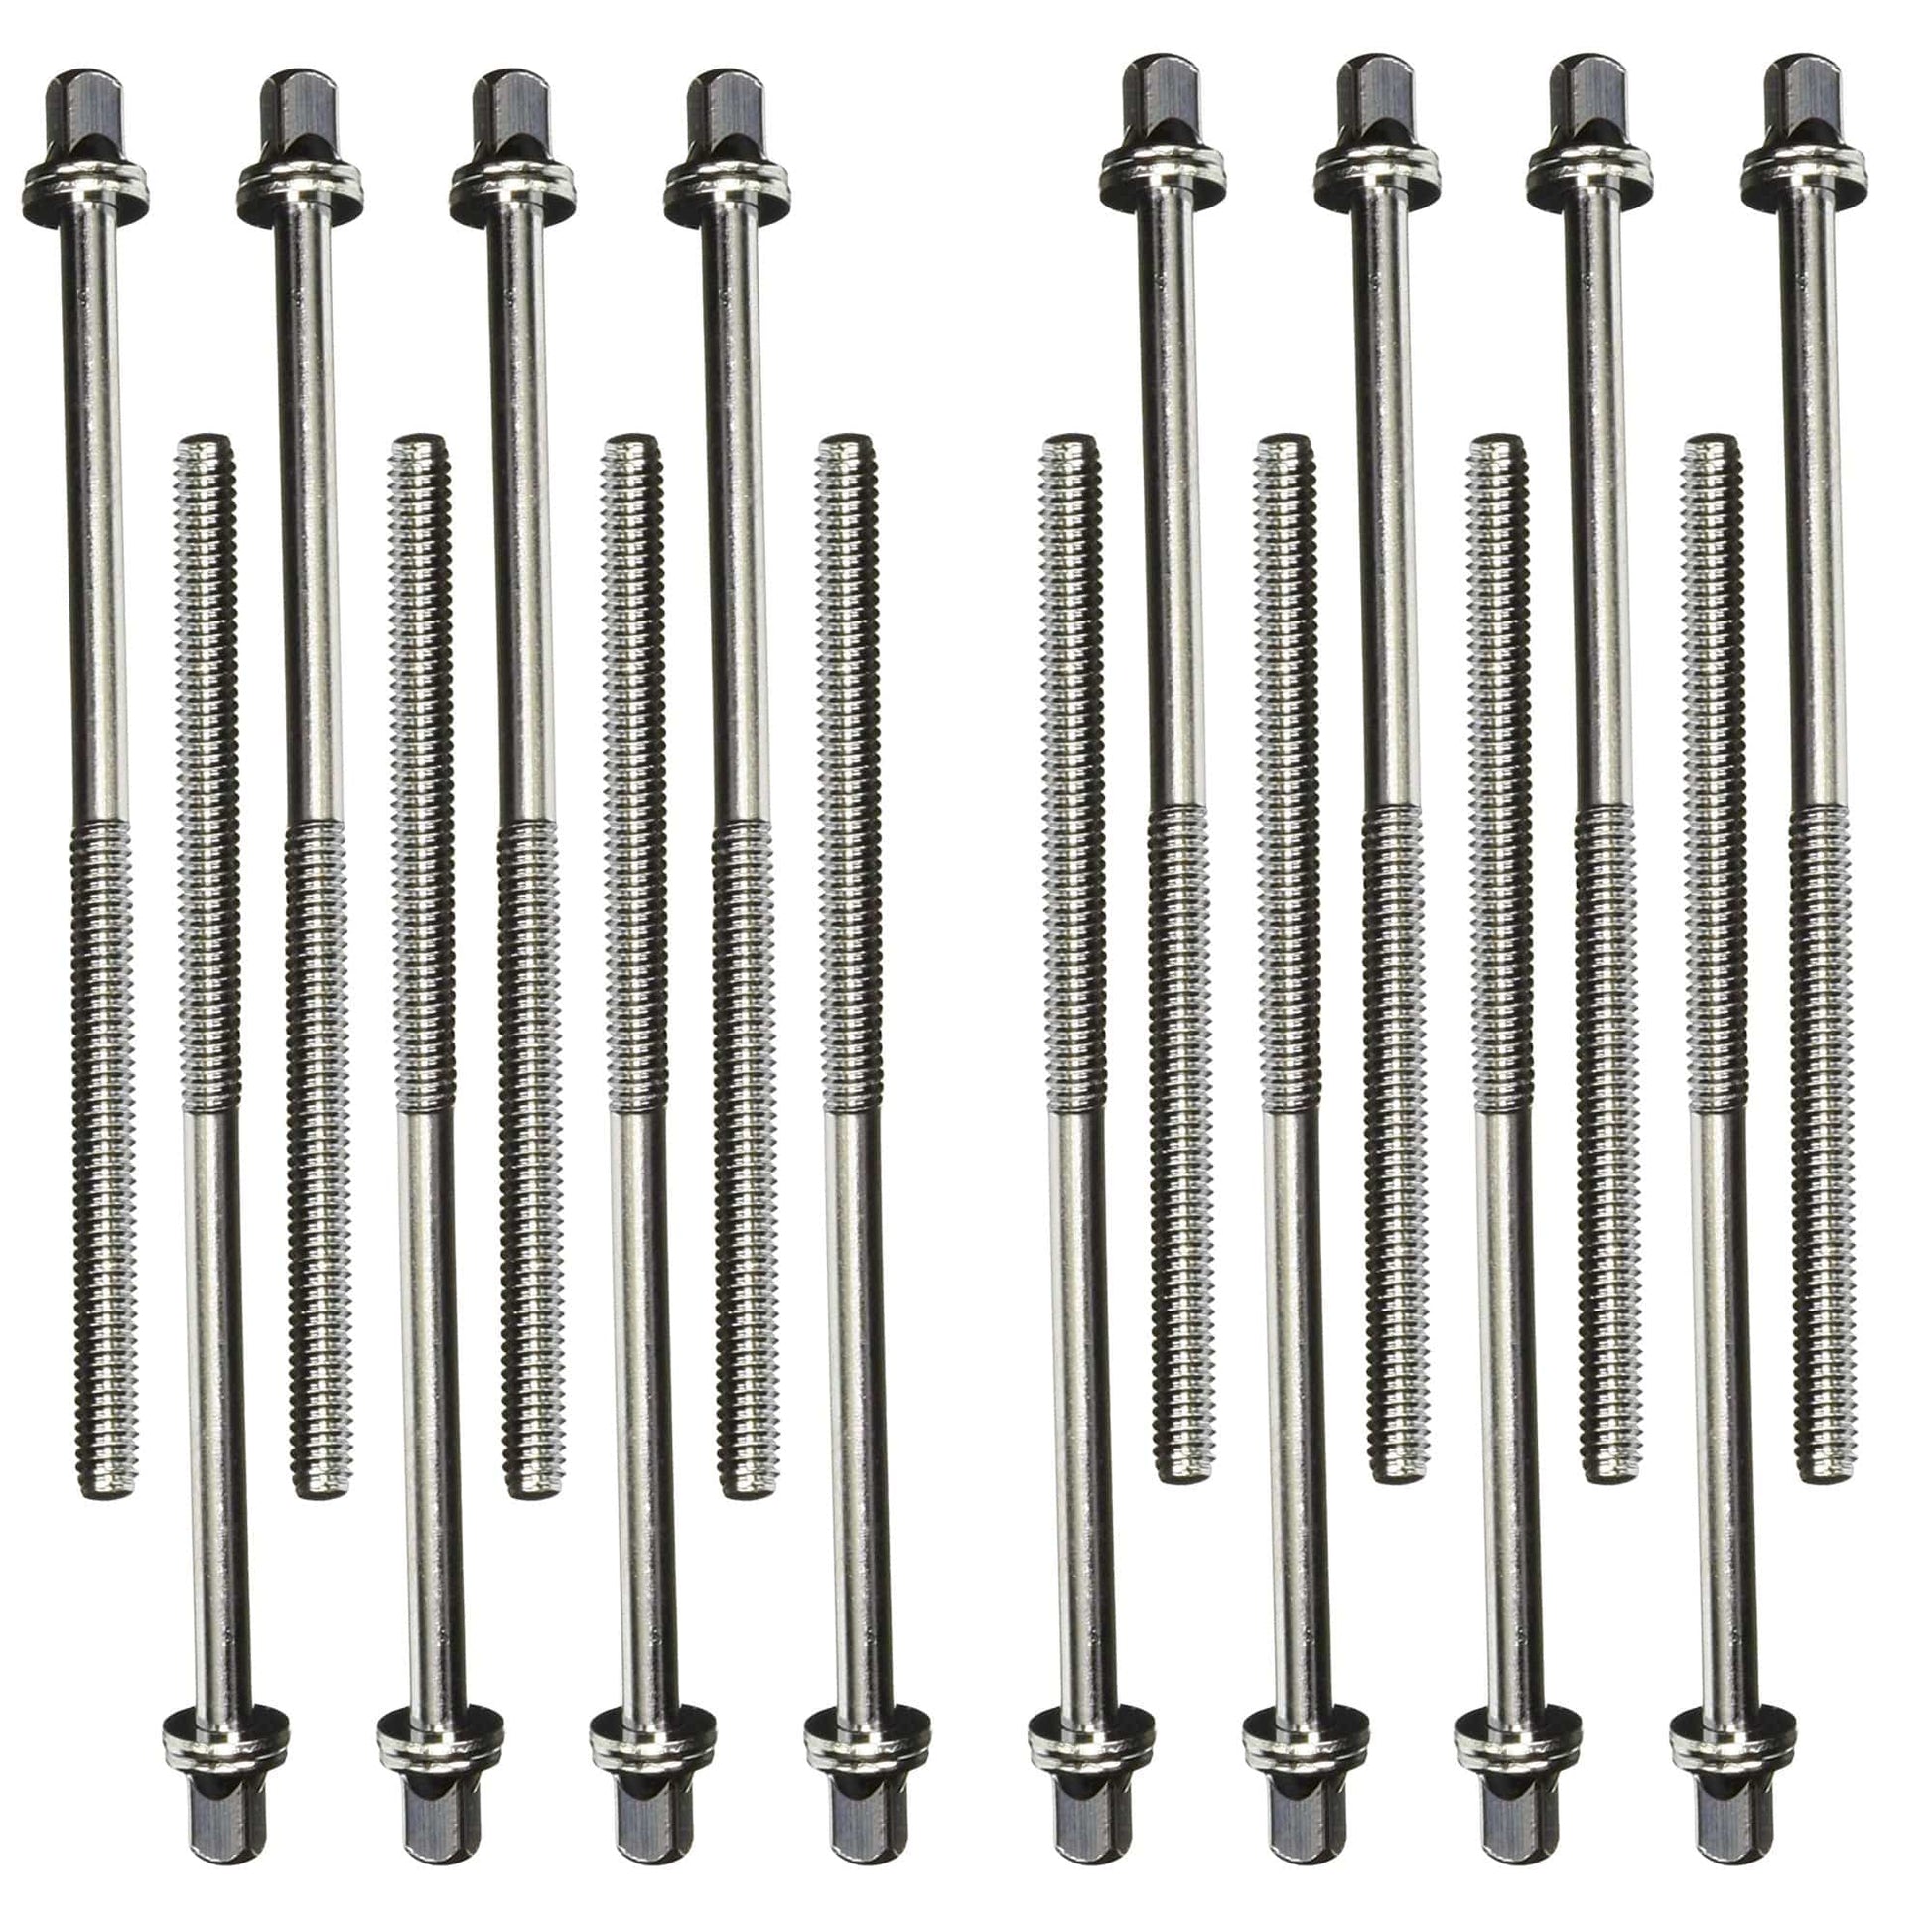 Gibraltar Bass Drum Key Rod 7/32" dia 4 3/6" Length (16 Pack Bundle) Drums and Percussion / Parts and Accessories / Drum Parts